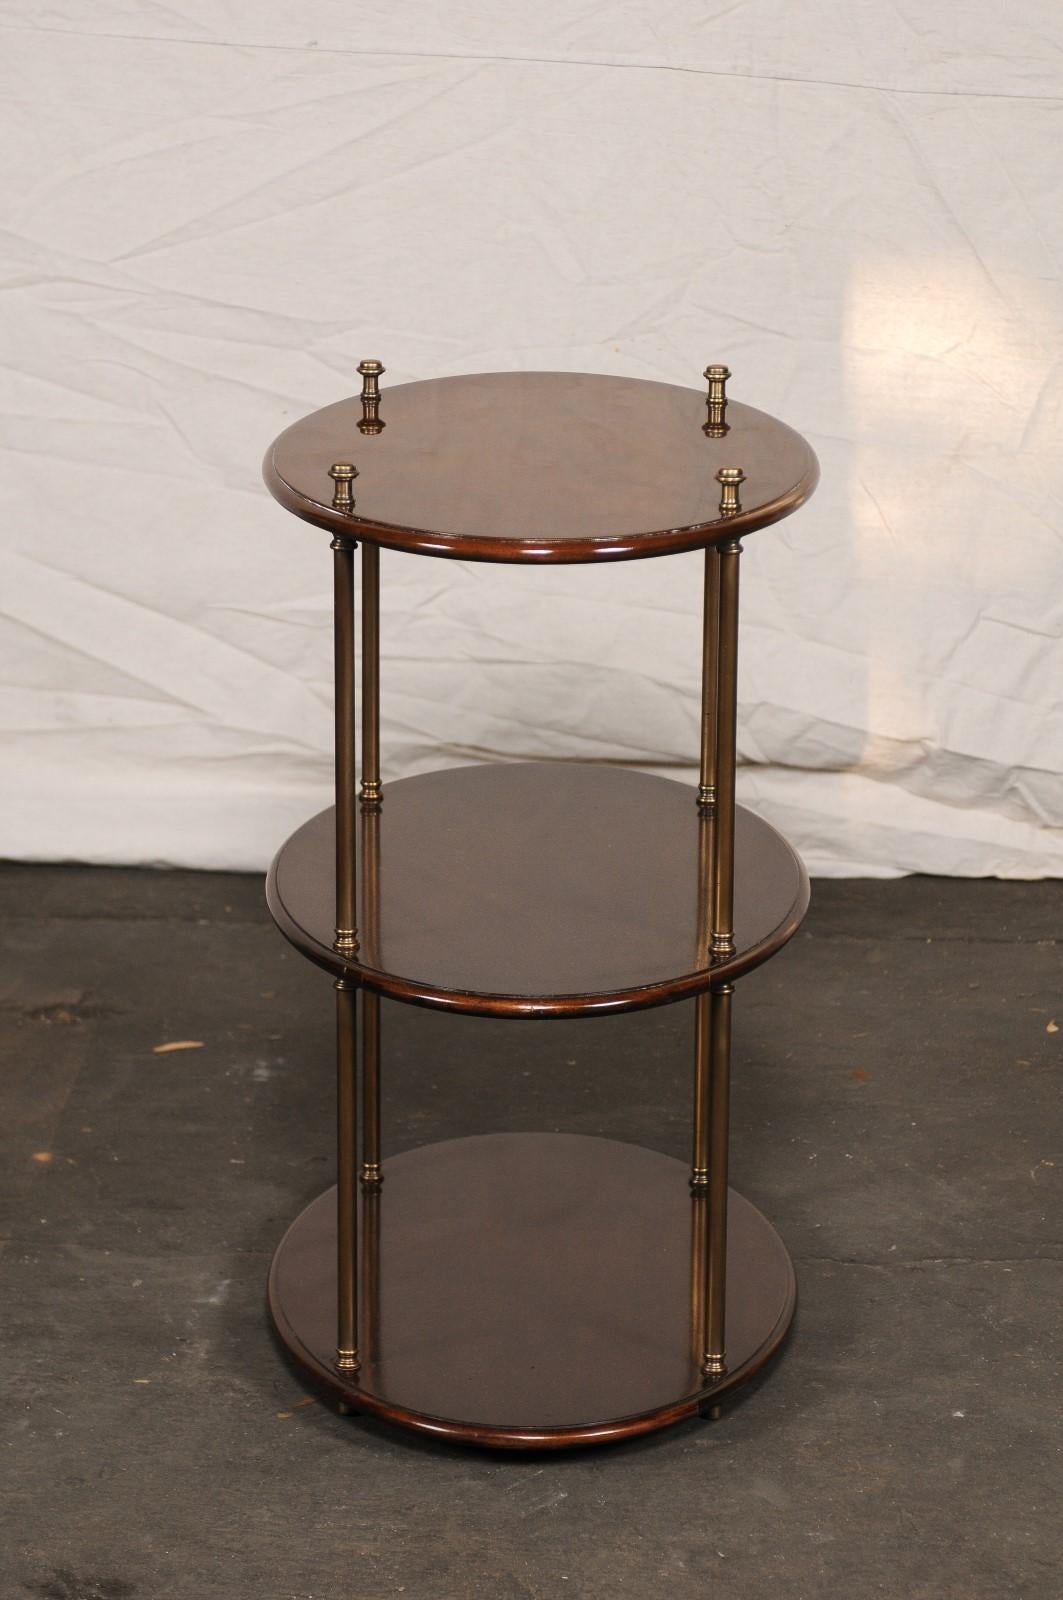 Campaign 19th-20th Century English Mahogany & Brass Three-Tier Oval Étagère For Sale